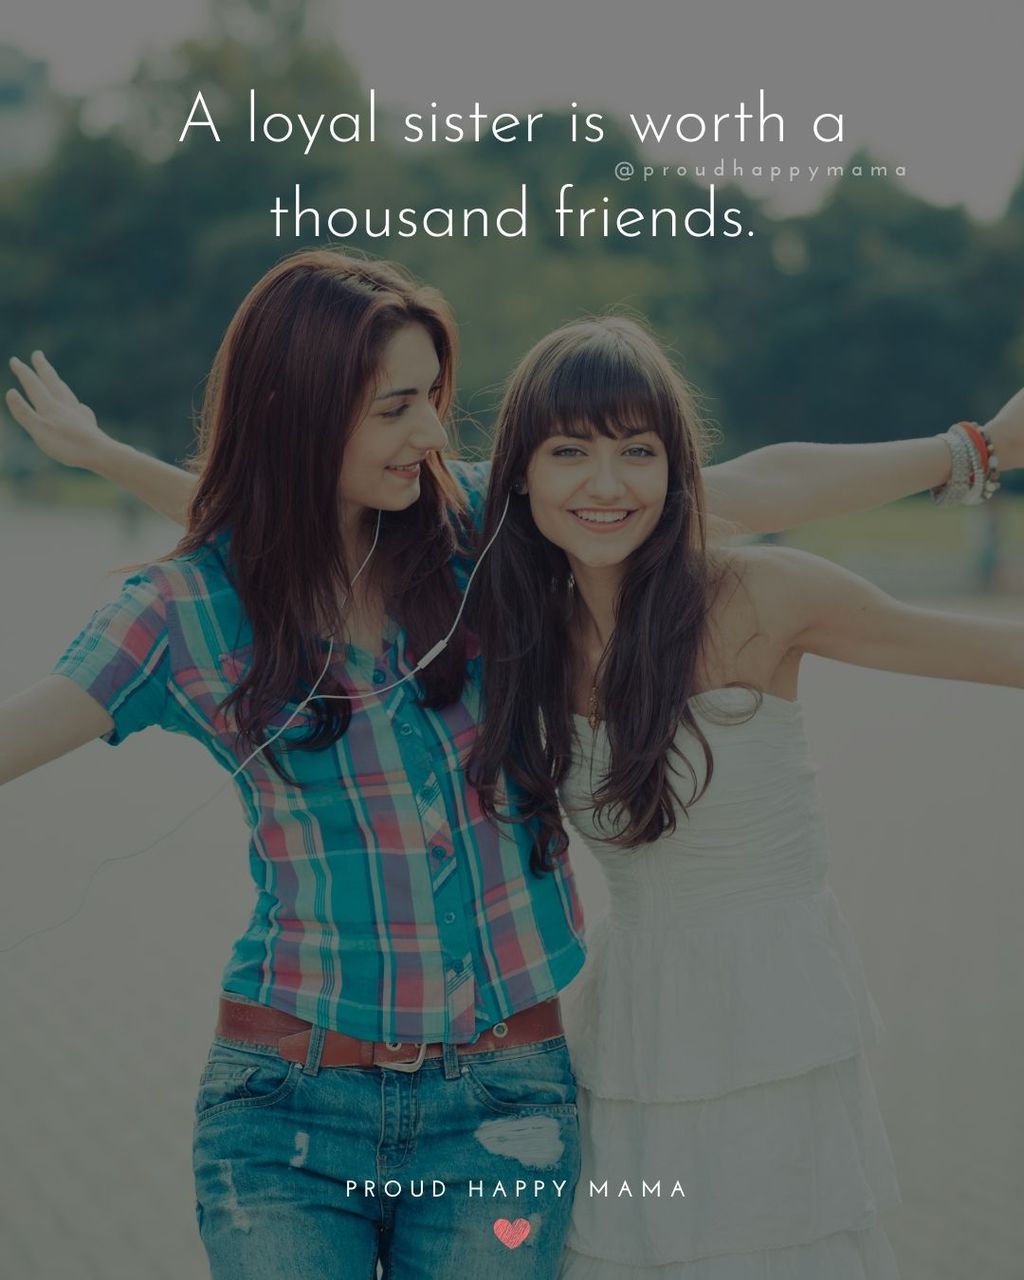 Sister Quotes - A loyal sister is worth a thousand friends.